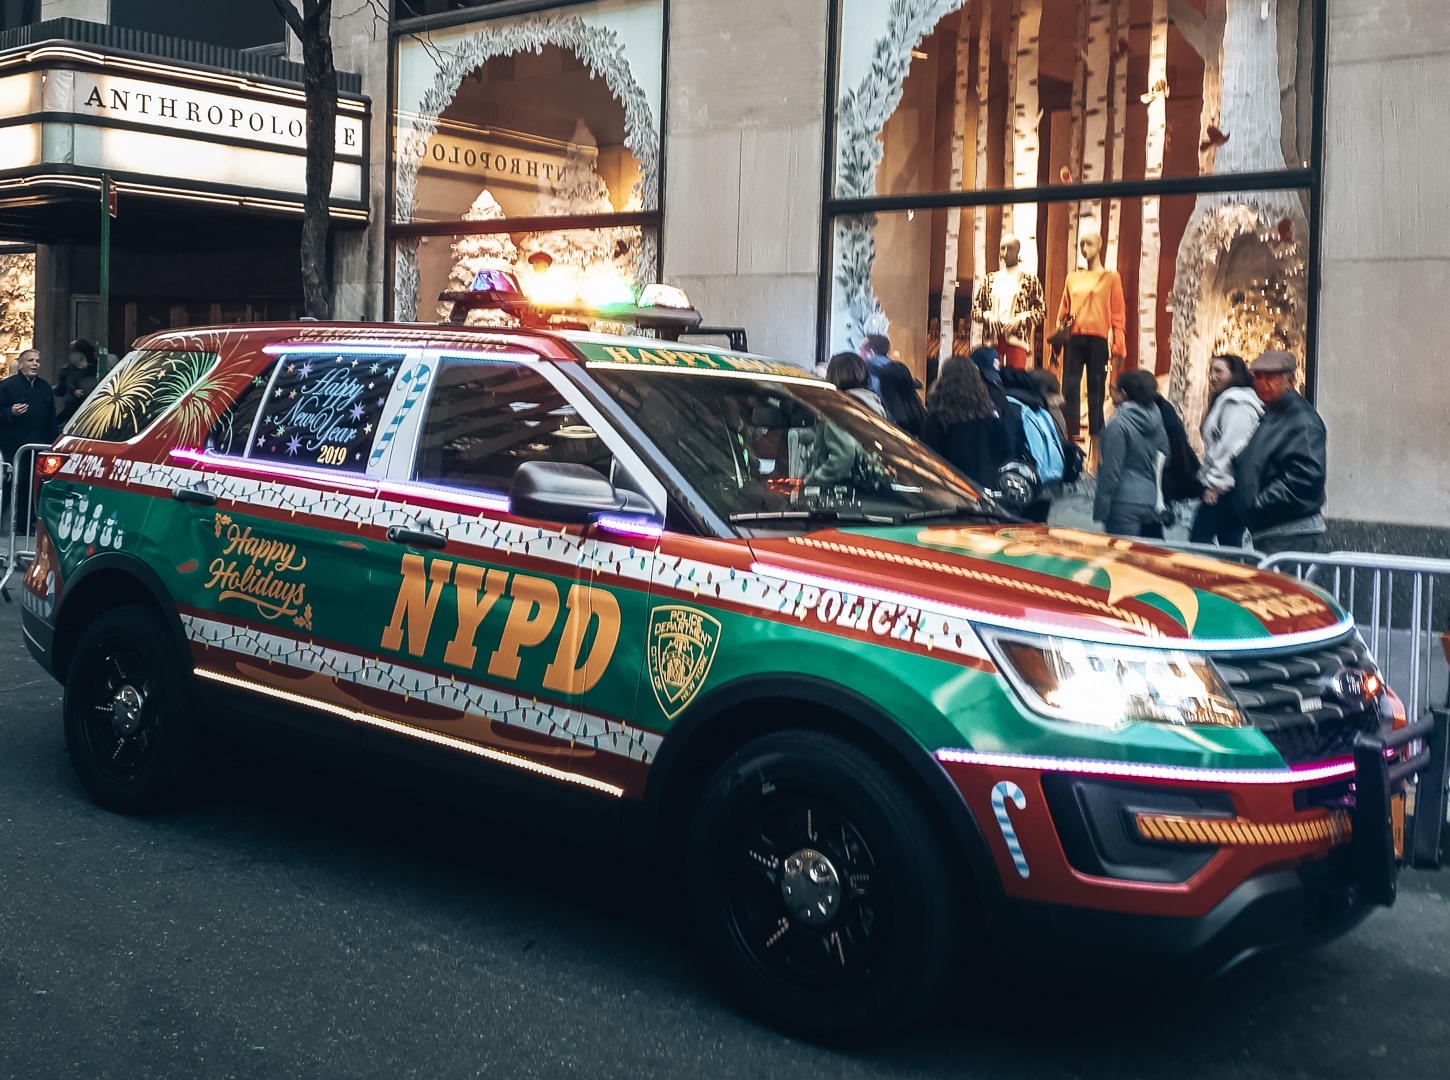 nypd voiture de police New York 